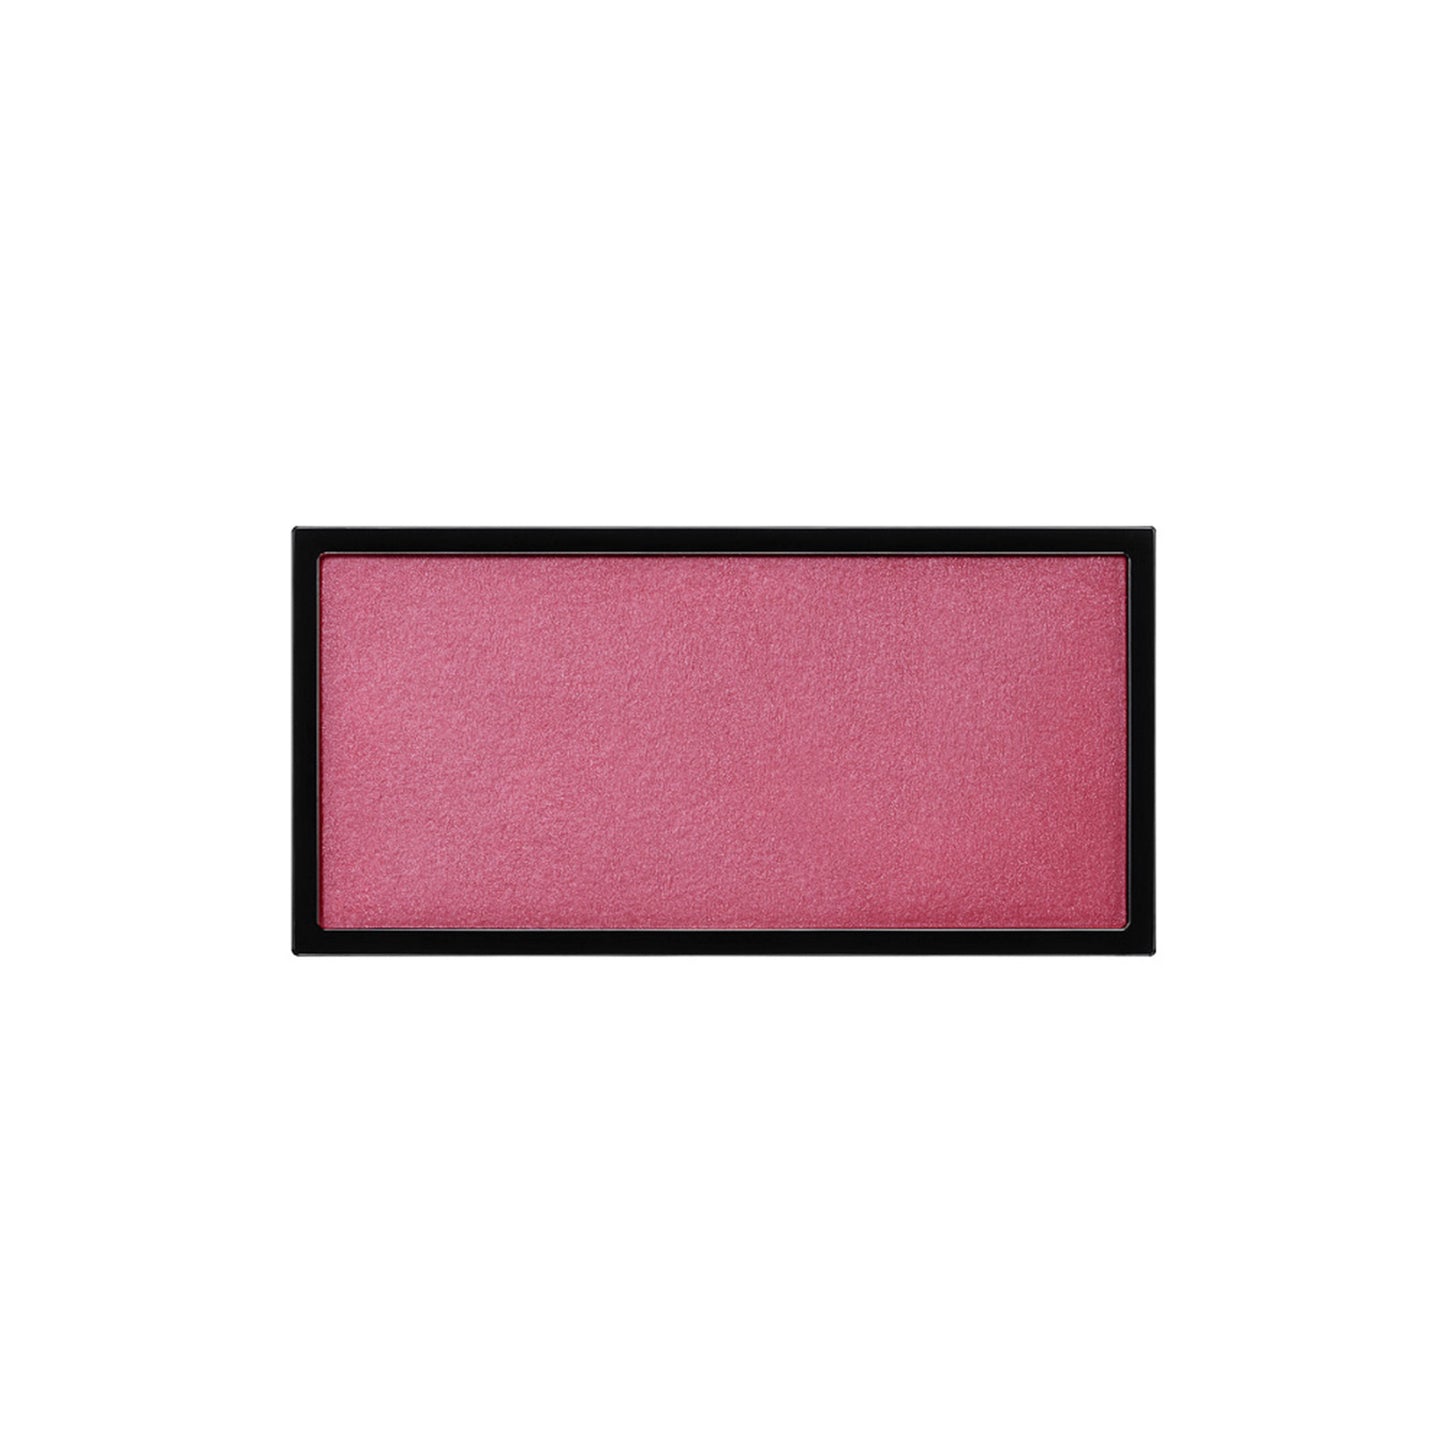 A rectangle shaped powder blush pan in a soft raspberry shade